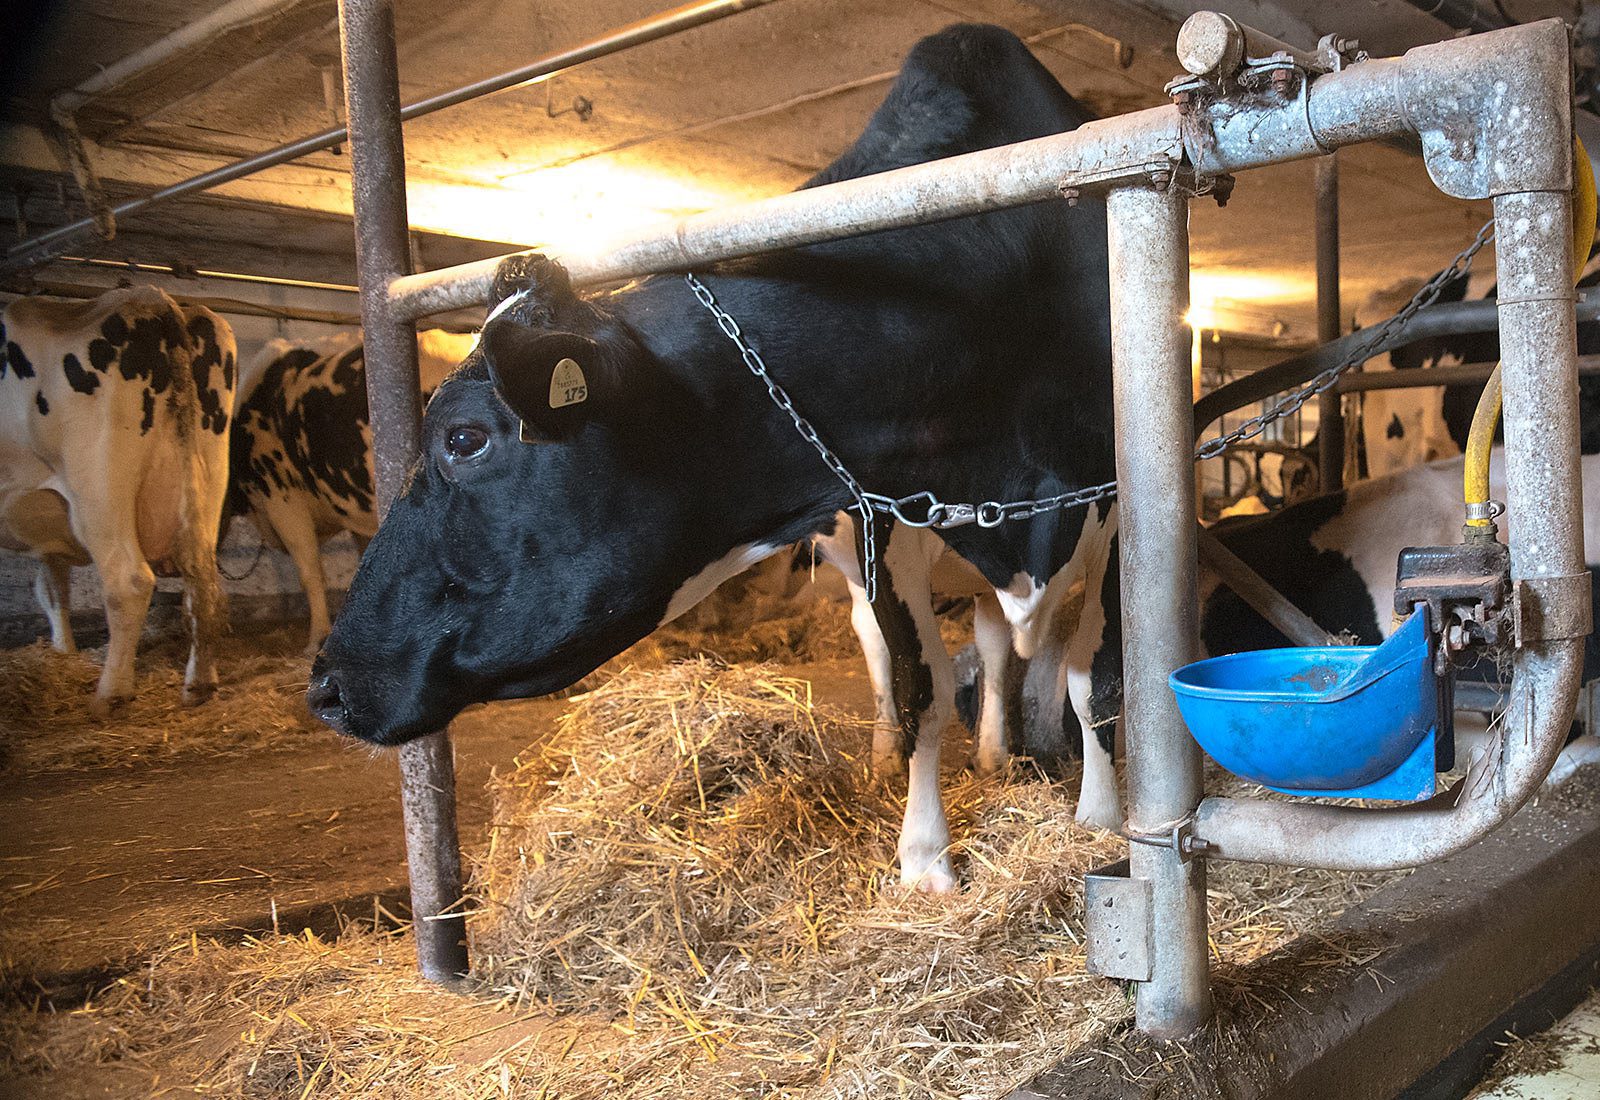 A dairy cow in a tie stall farm